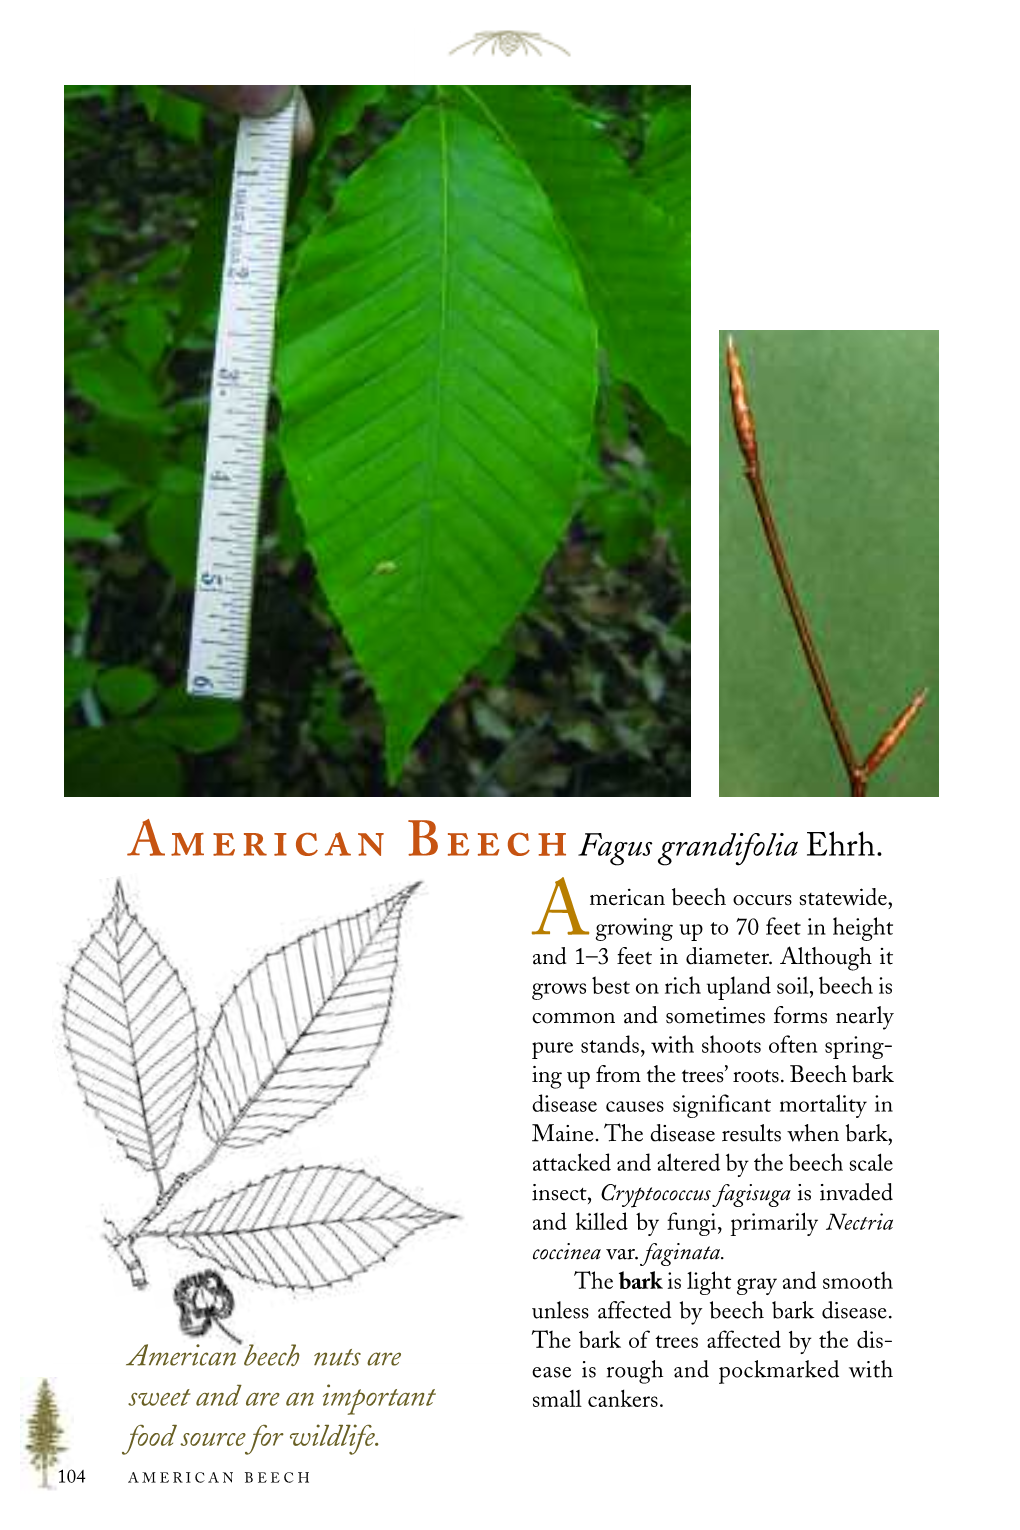 American Beech Nuts Are Ease Is Rough and Pockmarked with Sweet and Are an Important Small Cankers